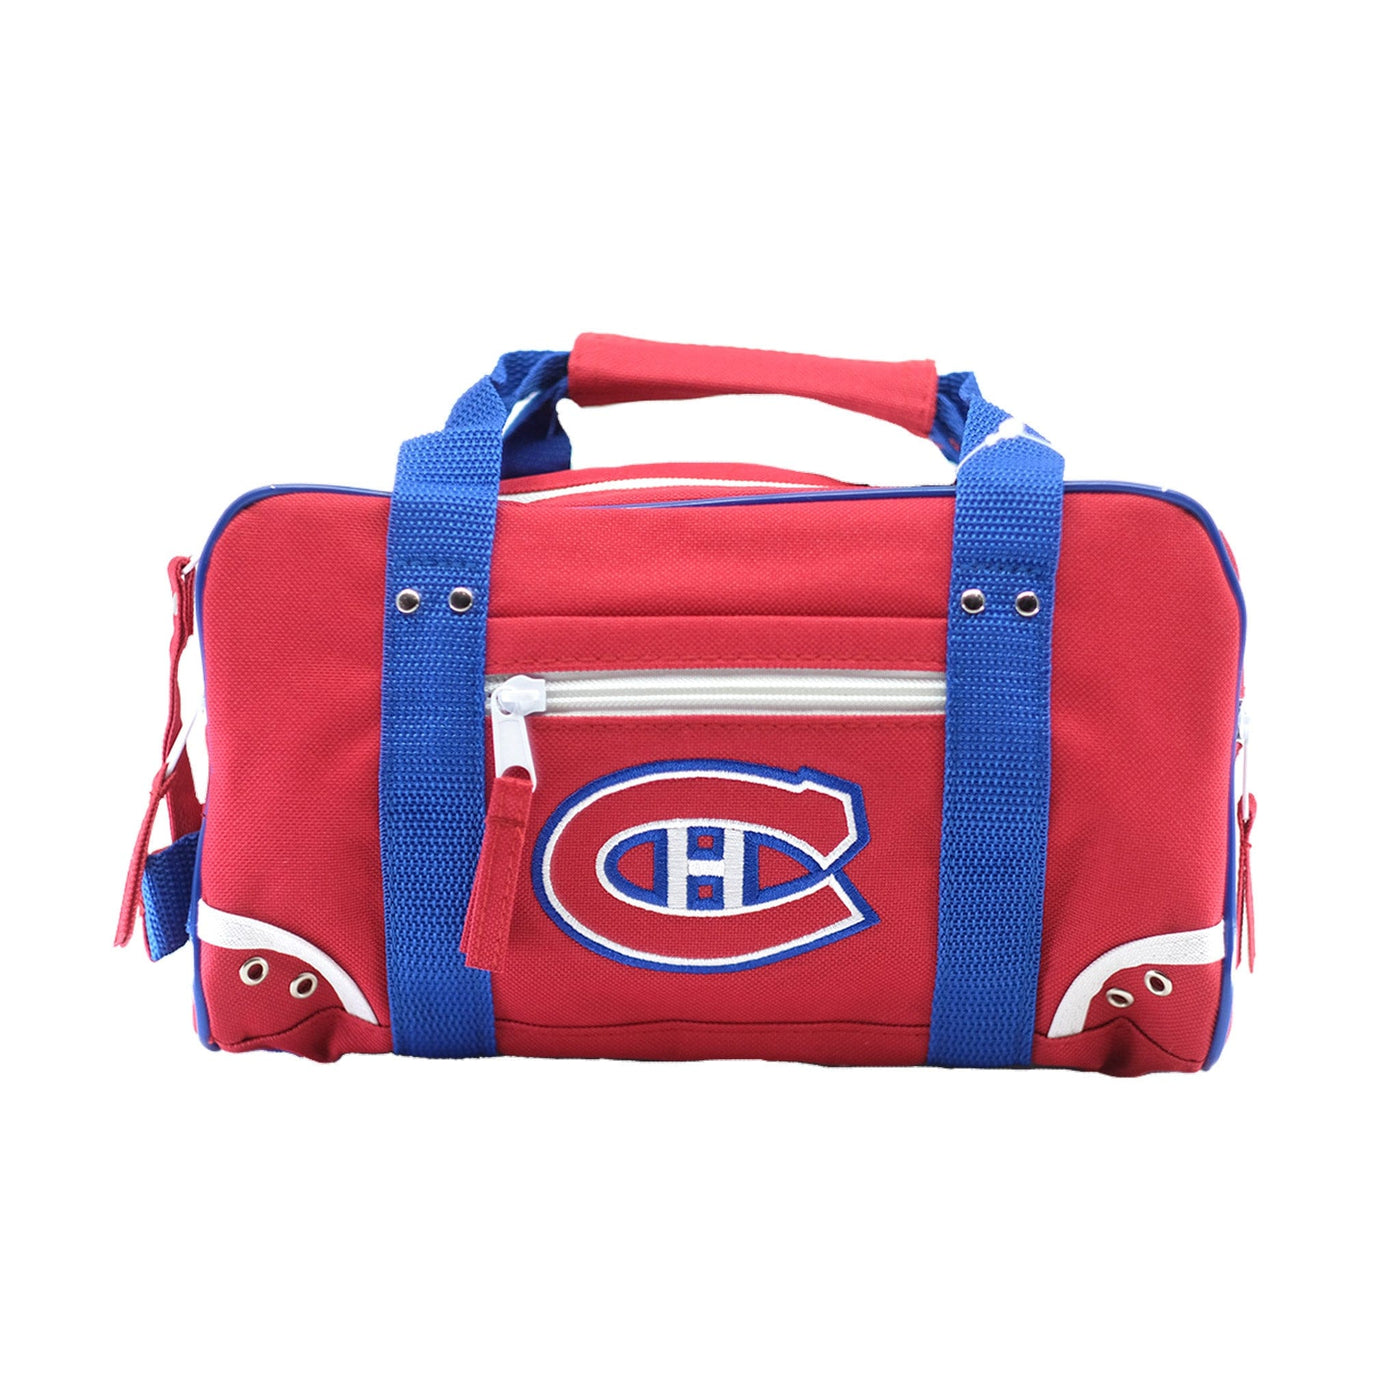 Montreal Canadiens Ultimate Sports Kit NHL Toiletry Bag - The Hockey Shop Source For Sports